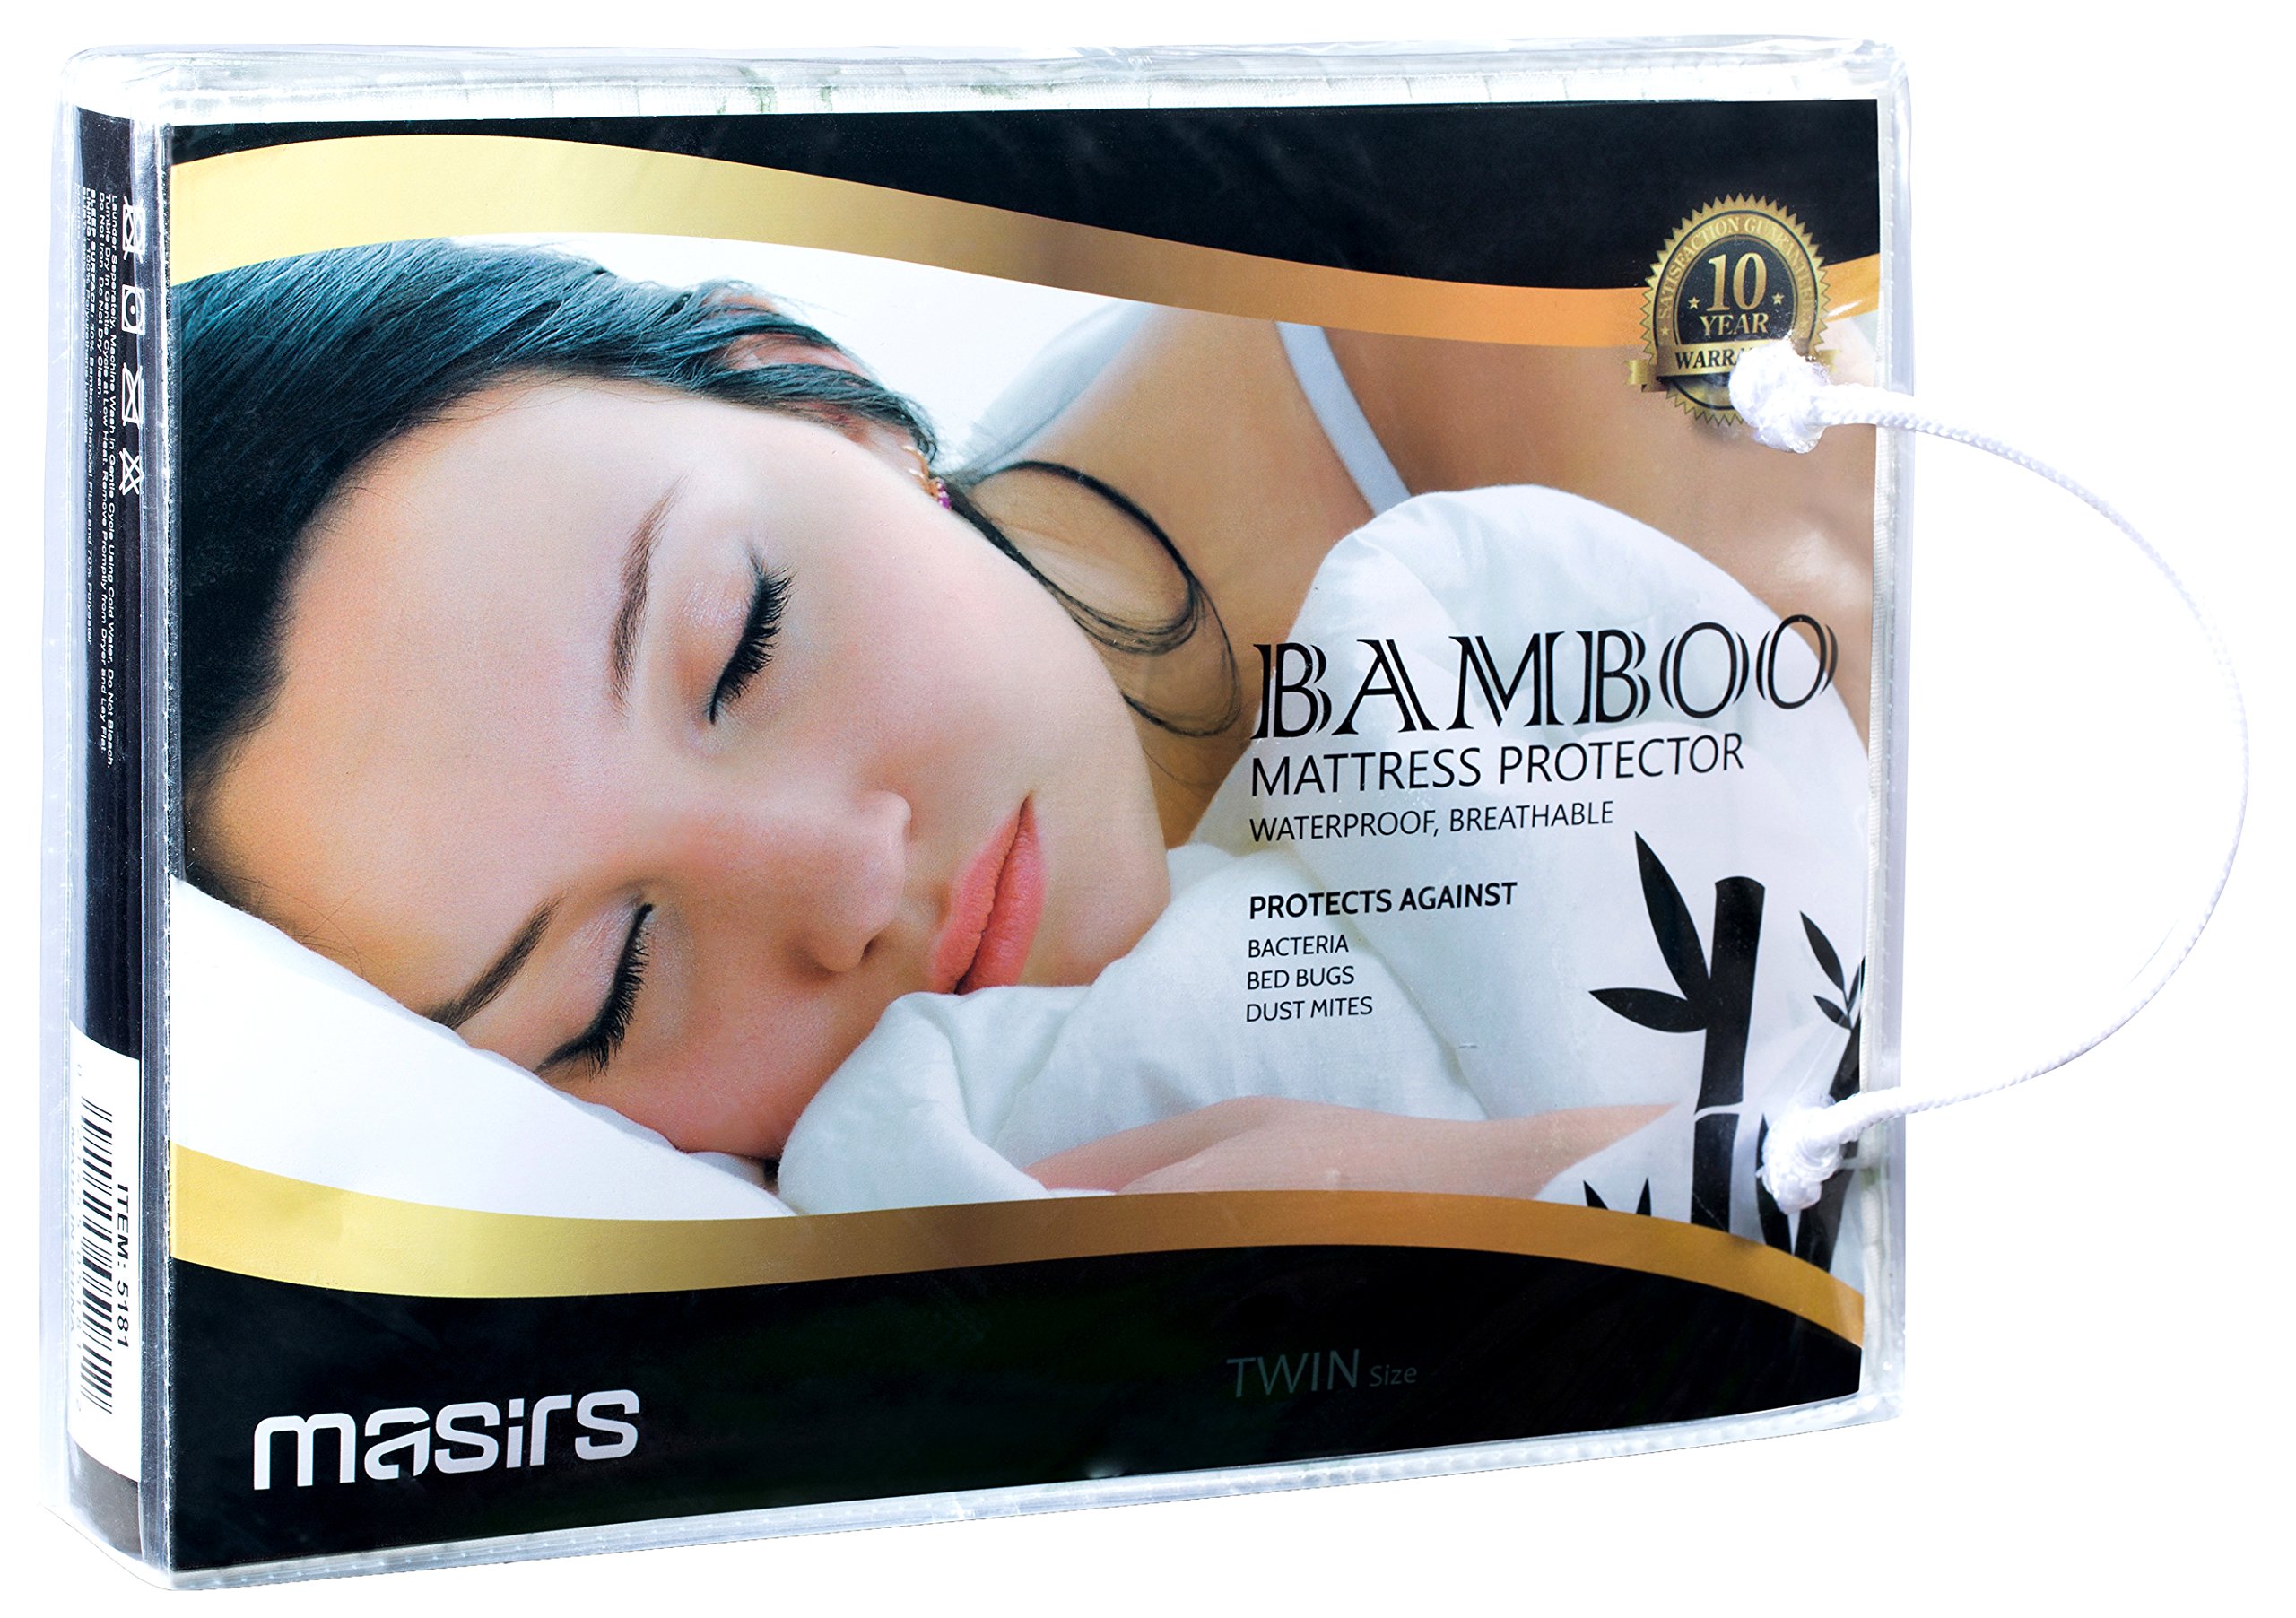 Book Cover Waterproof Bamboo Mattress Protector - Thick and Soft Quilted Fabric Will Give You a Comfortable, Quiet and Cool Night Sleep. Quality Fabric That is Durable and Machine Wash Really Well. (Twin Size) Bamboo Twin